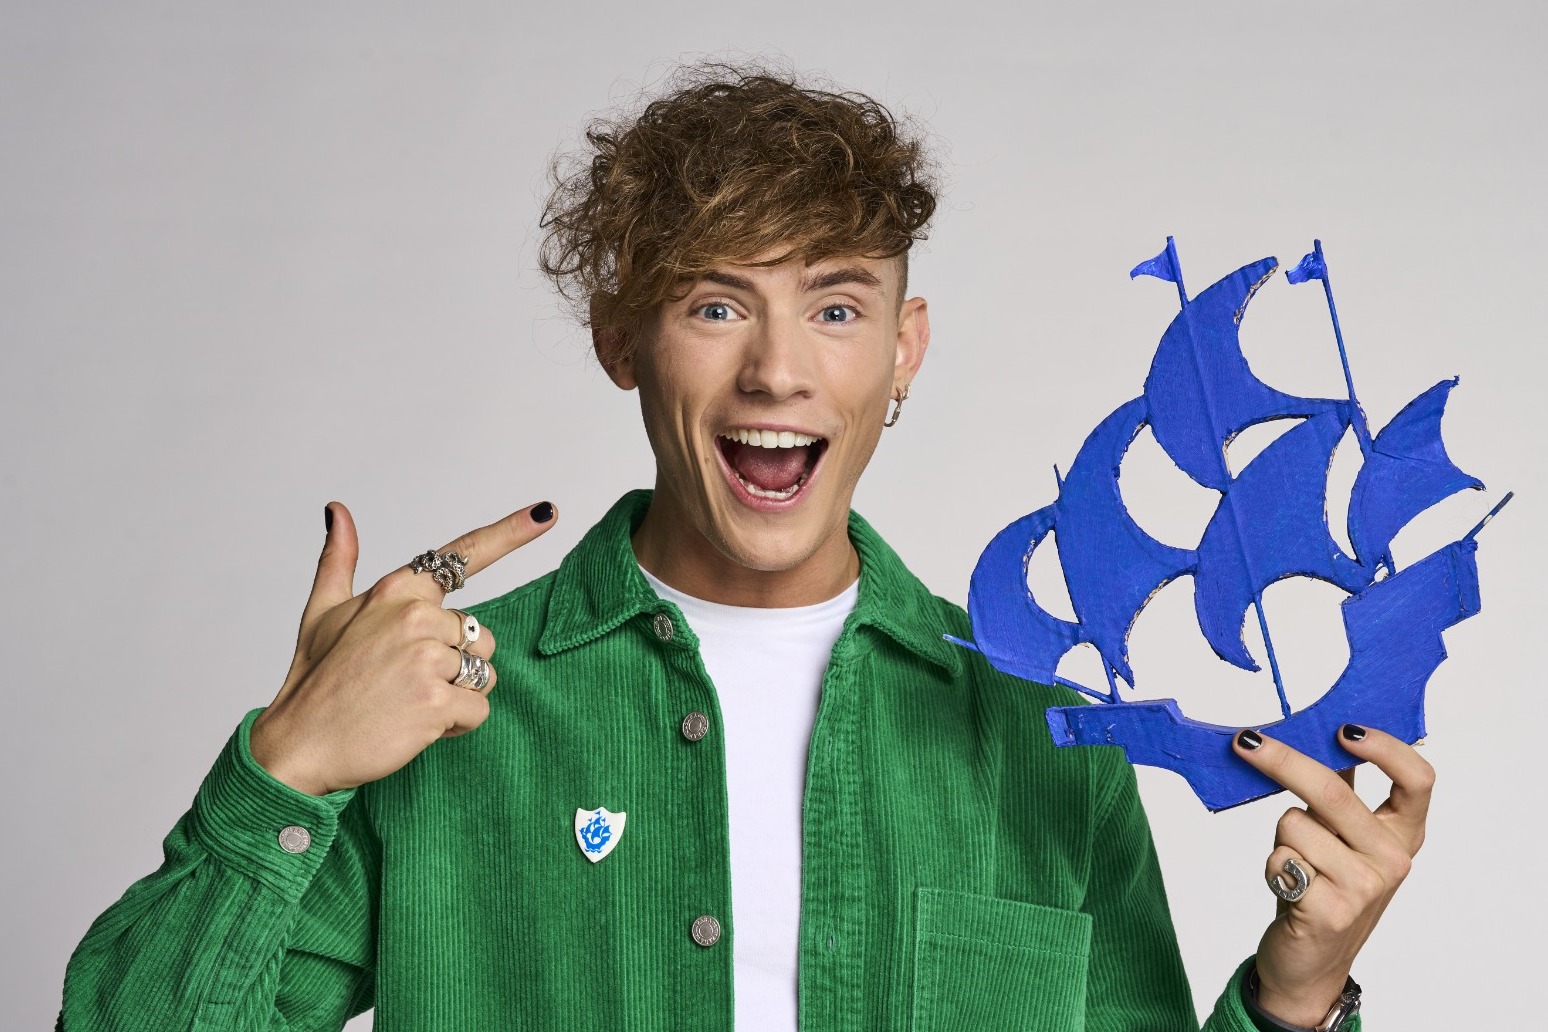 Magician Joel Mawhinney joins Blue Peter presenting line-up 